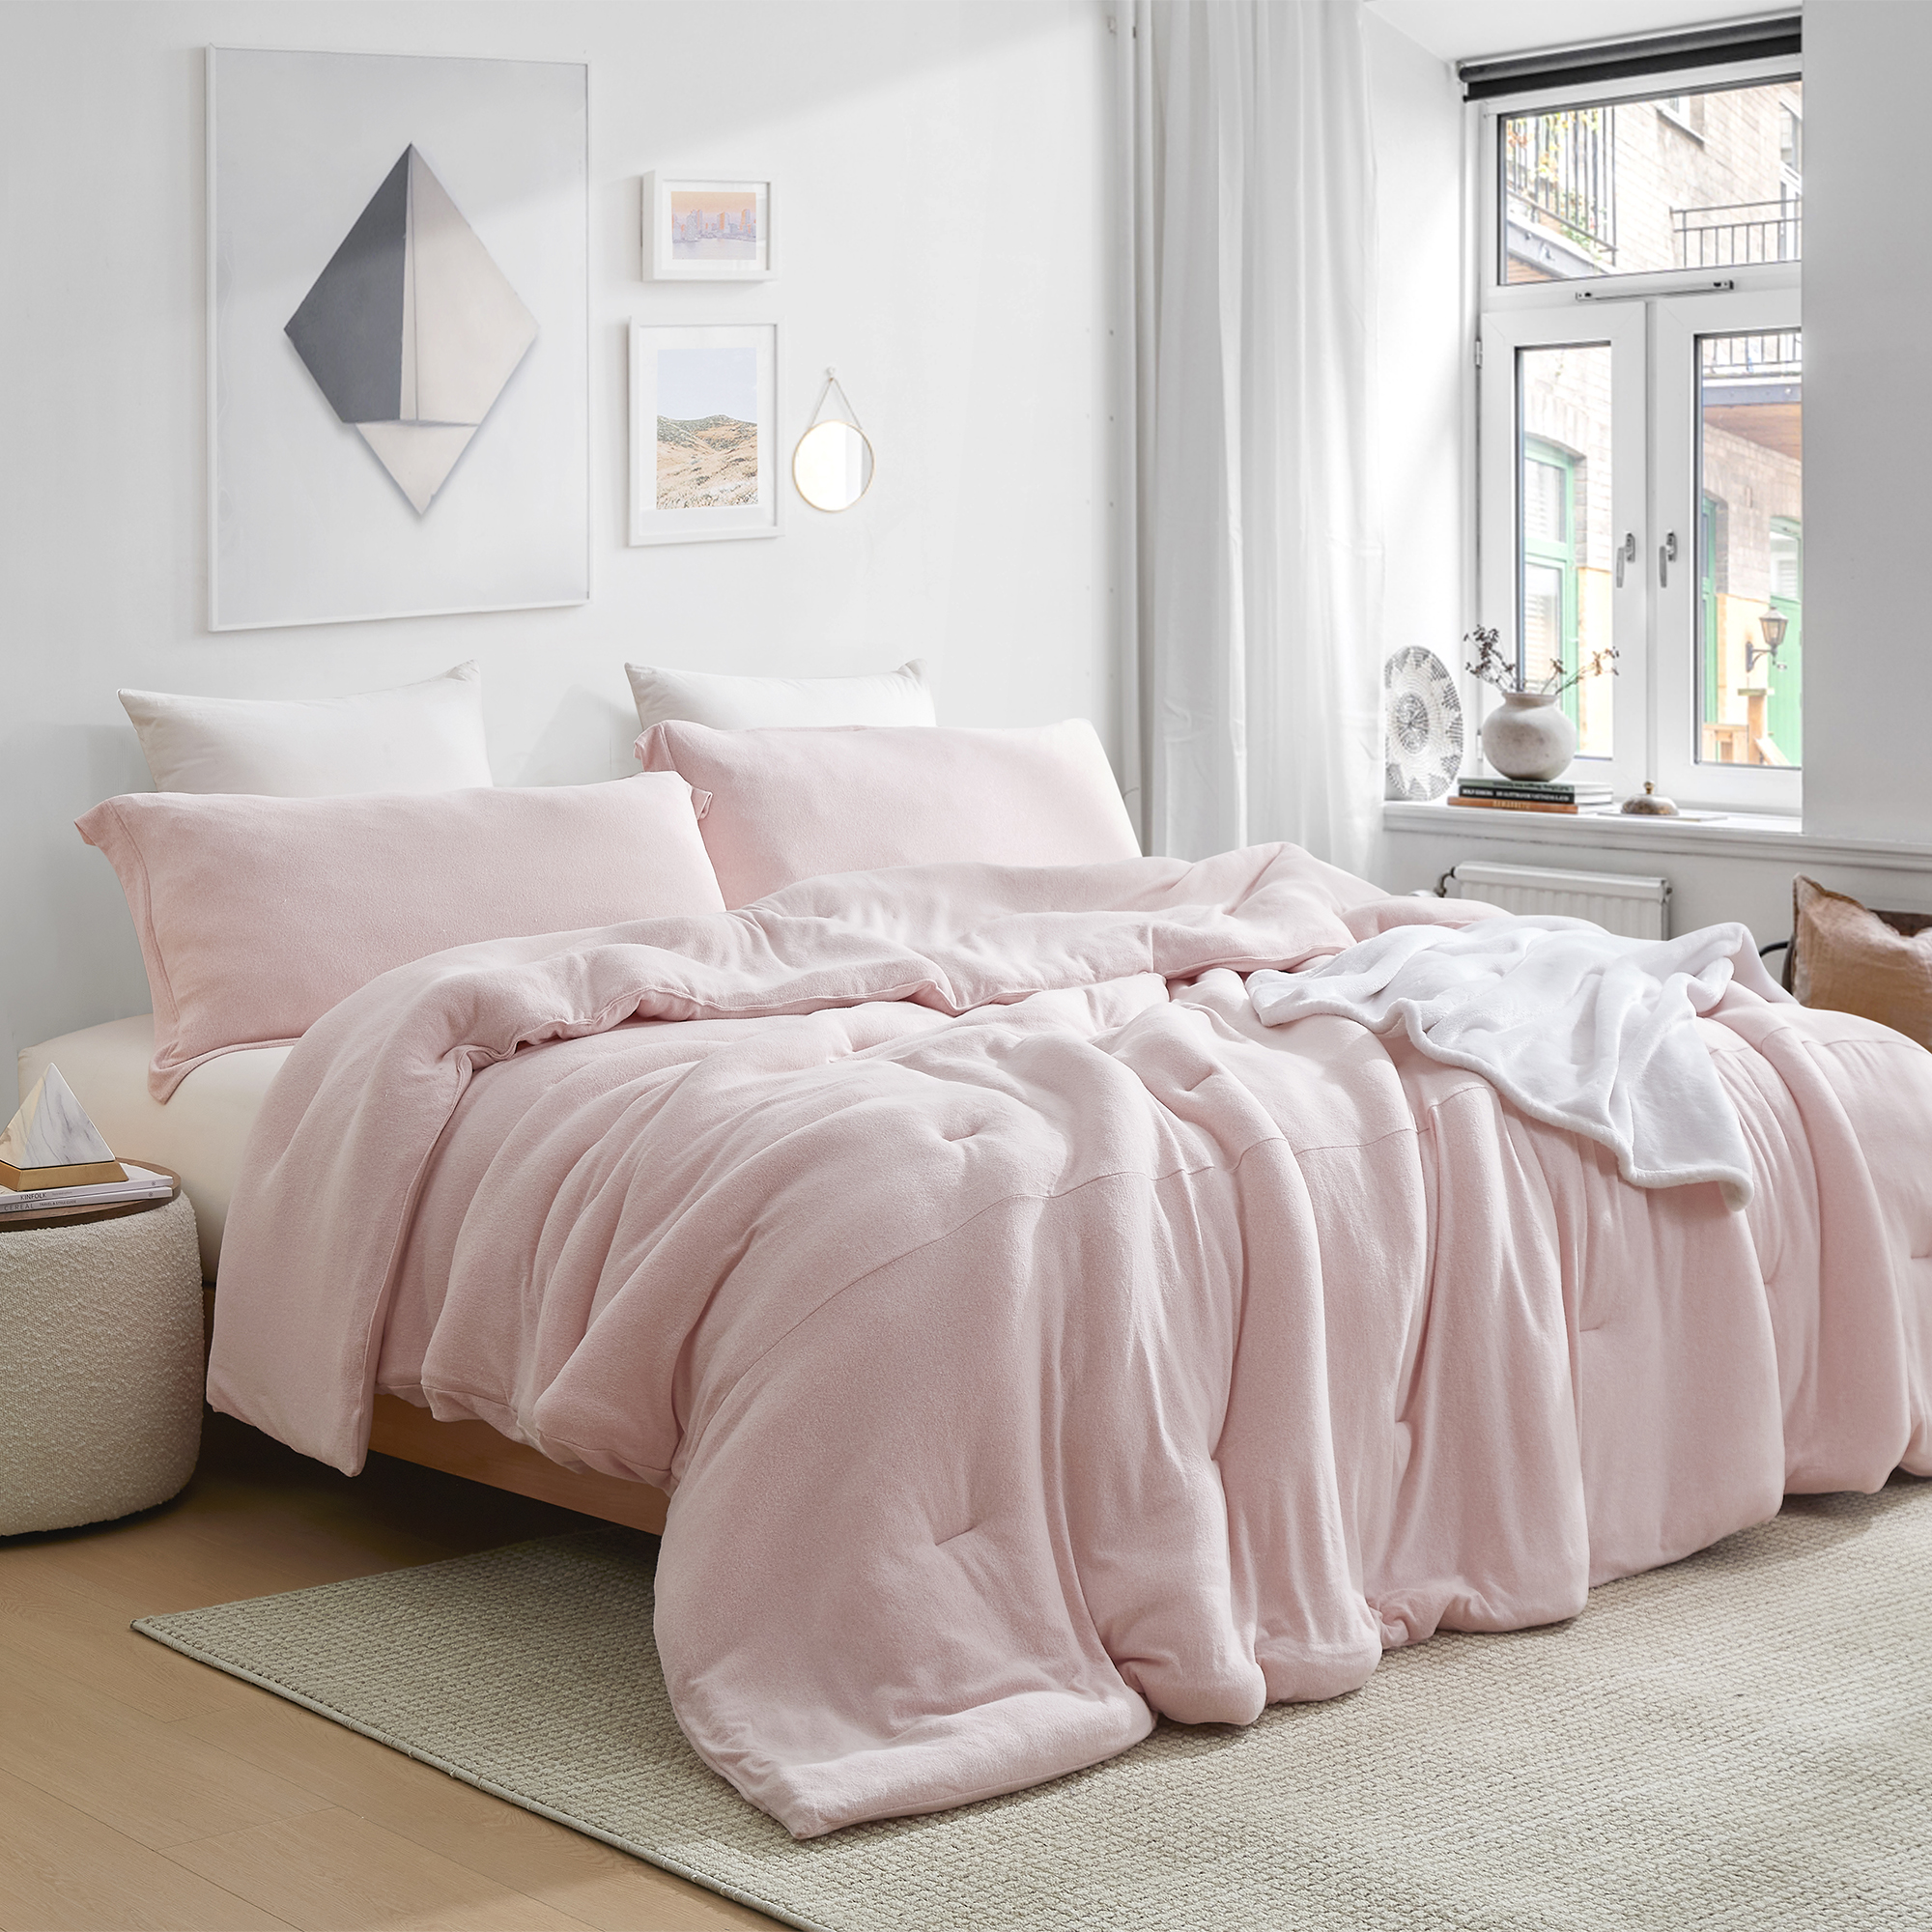 Sweater Weather - Coma Inducer® Oversized Comforter - Cardigan Pink